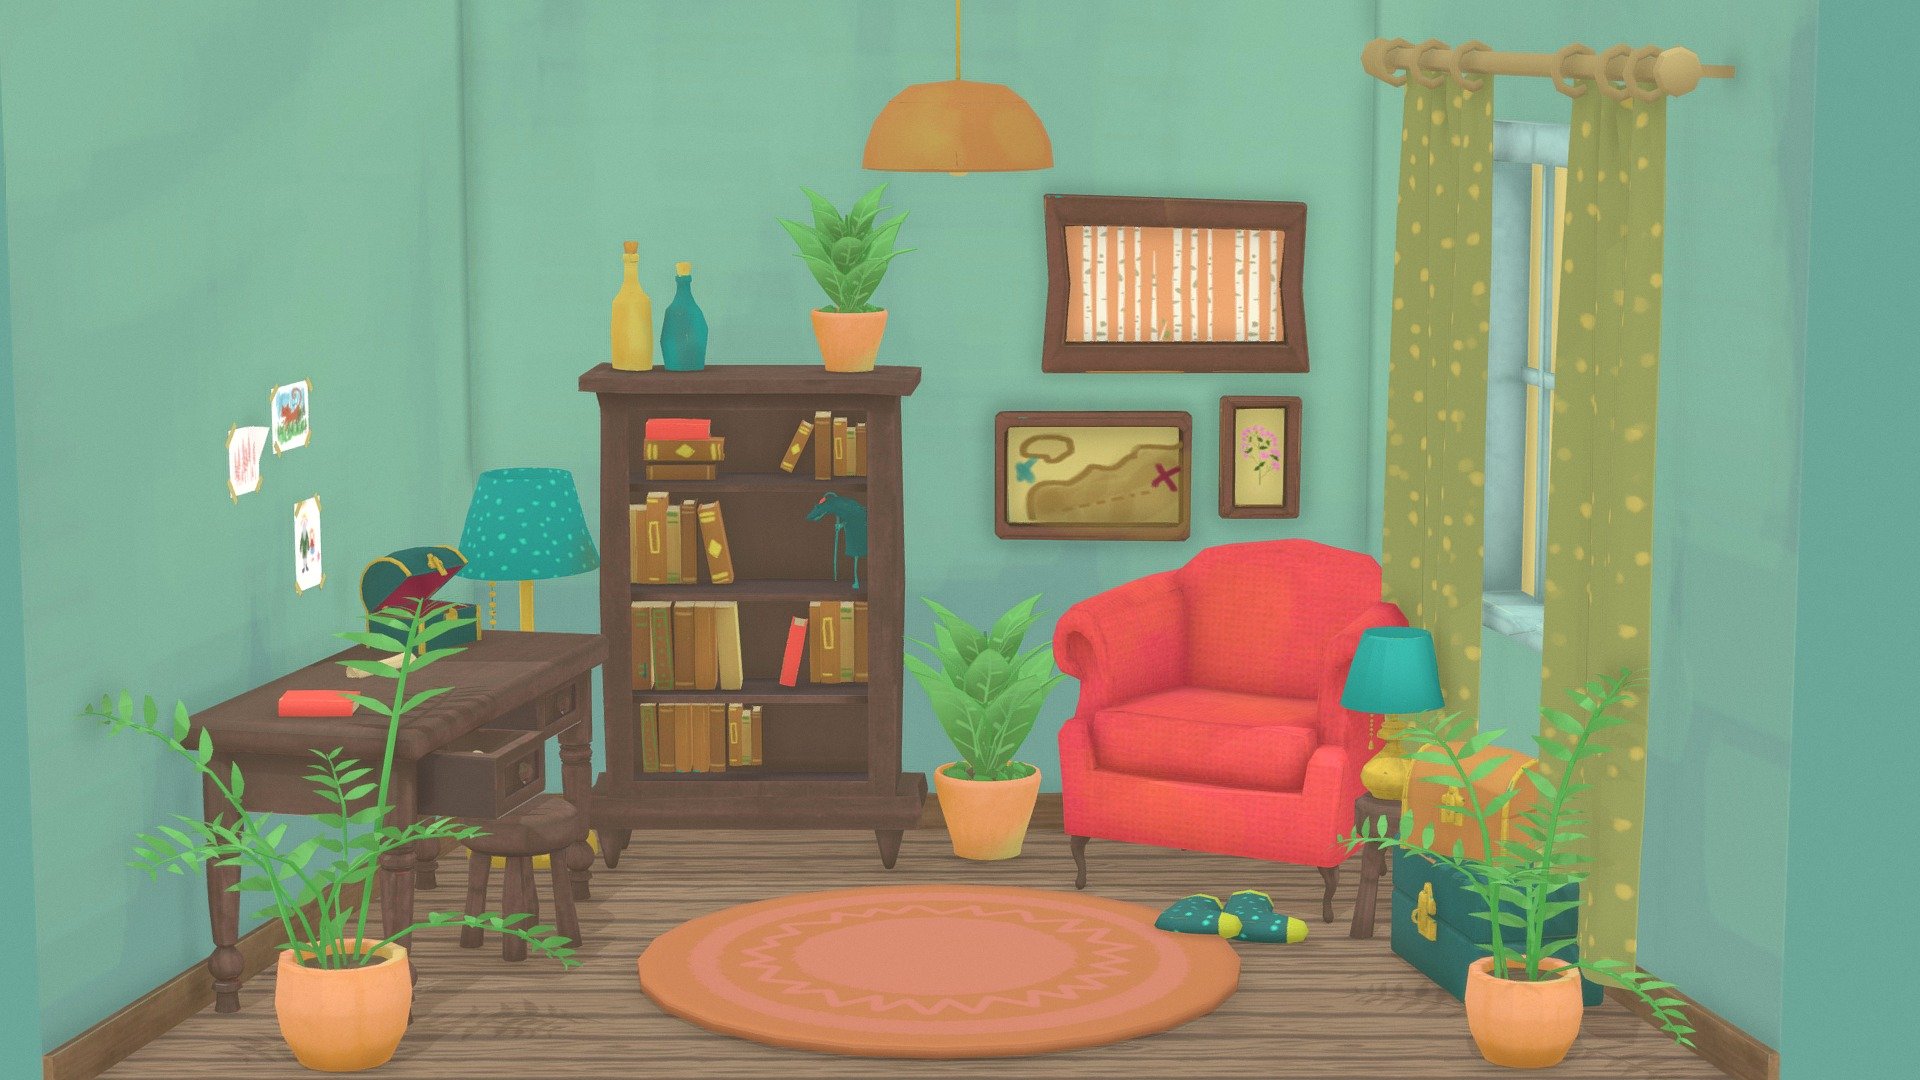 This room was created for a game “Maru and her make-believe world” 3d model